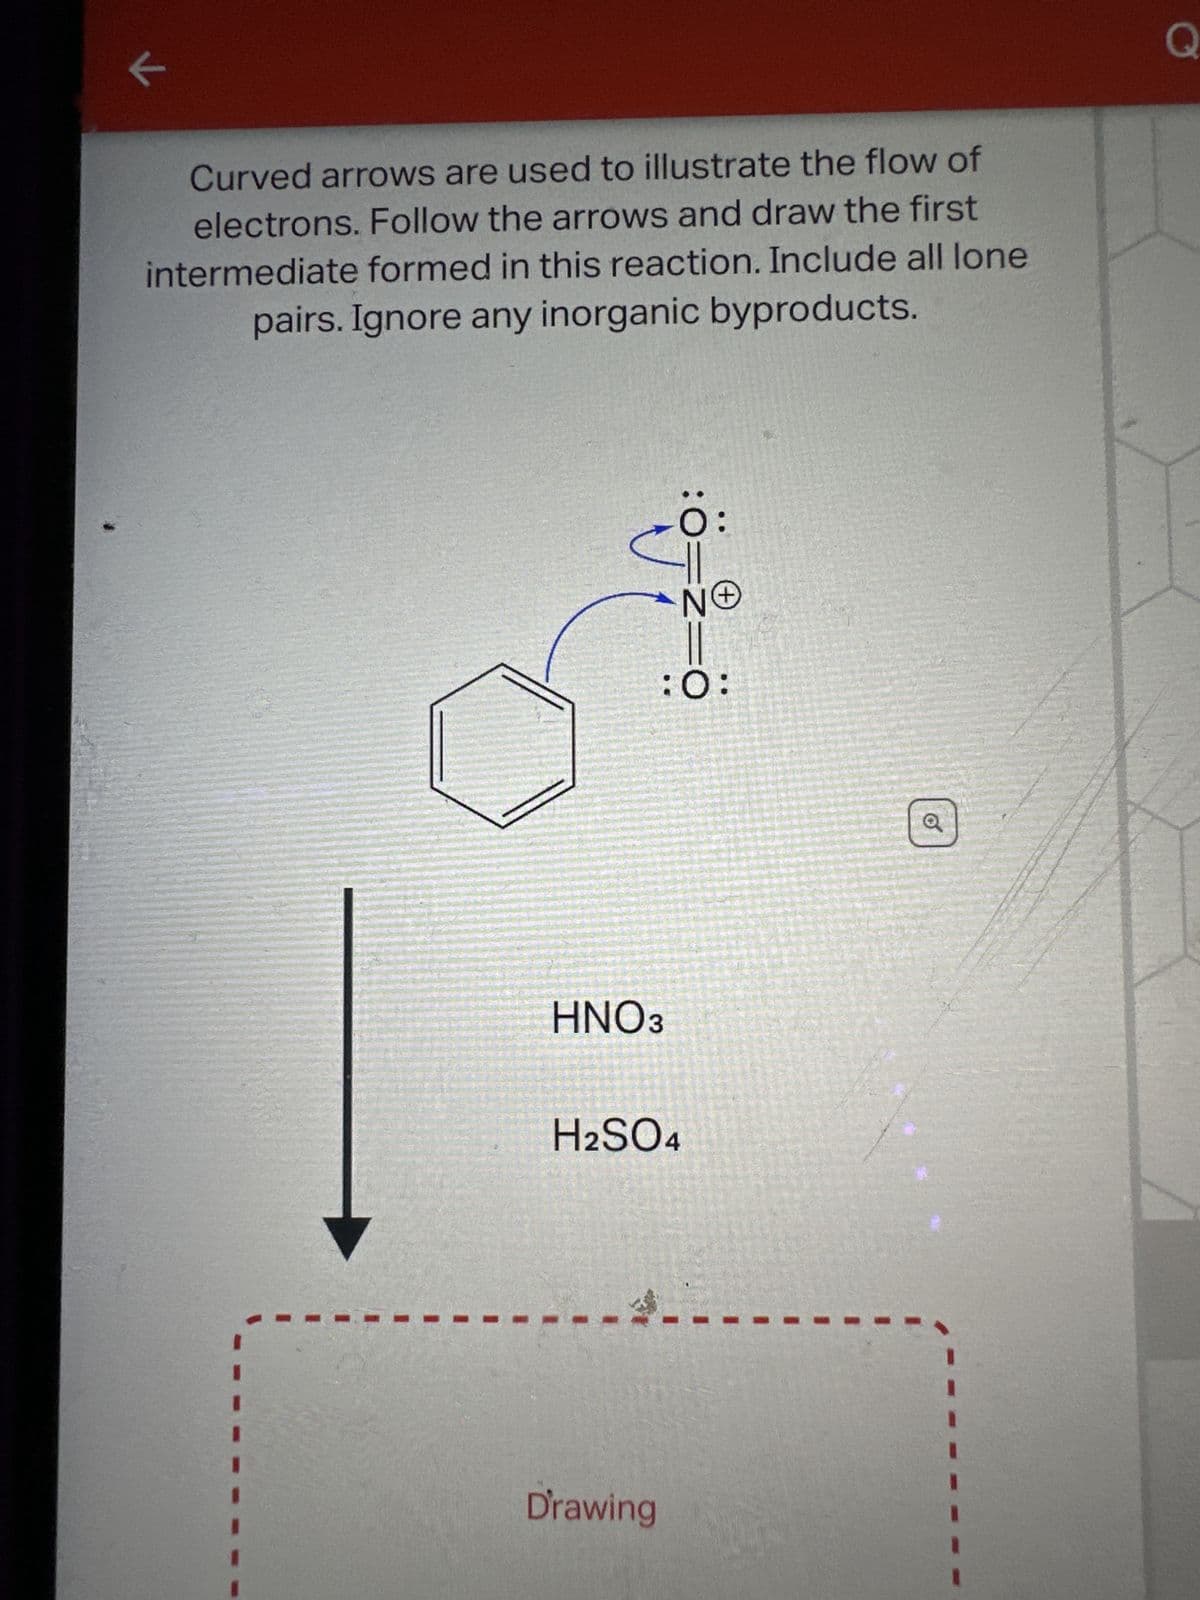 K
Curved arrows are used to illustrate the flow of
electrons. Follow the arrows and draw the first
intermediate formed in this reaction. Include all lone
pairs. Ignore any inorganic byproducts.
HNO3
Drawing
:0=
O:
-11
NO
:O:
H2SO4
Q